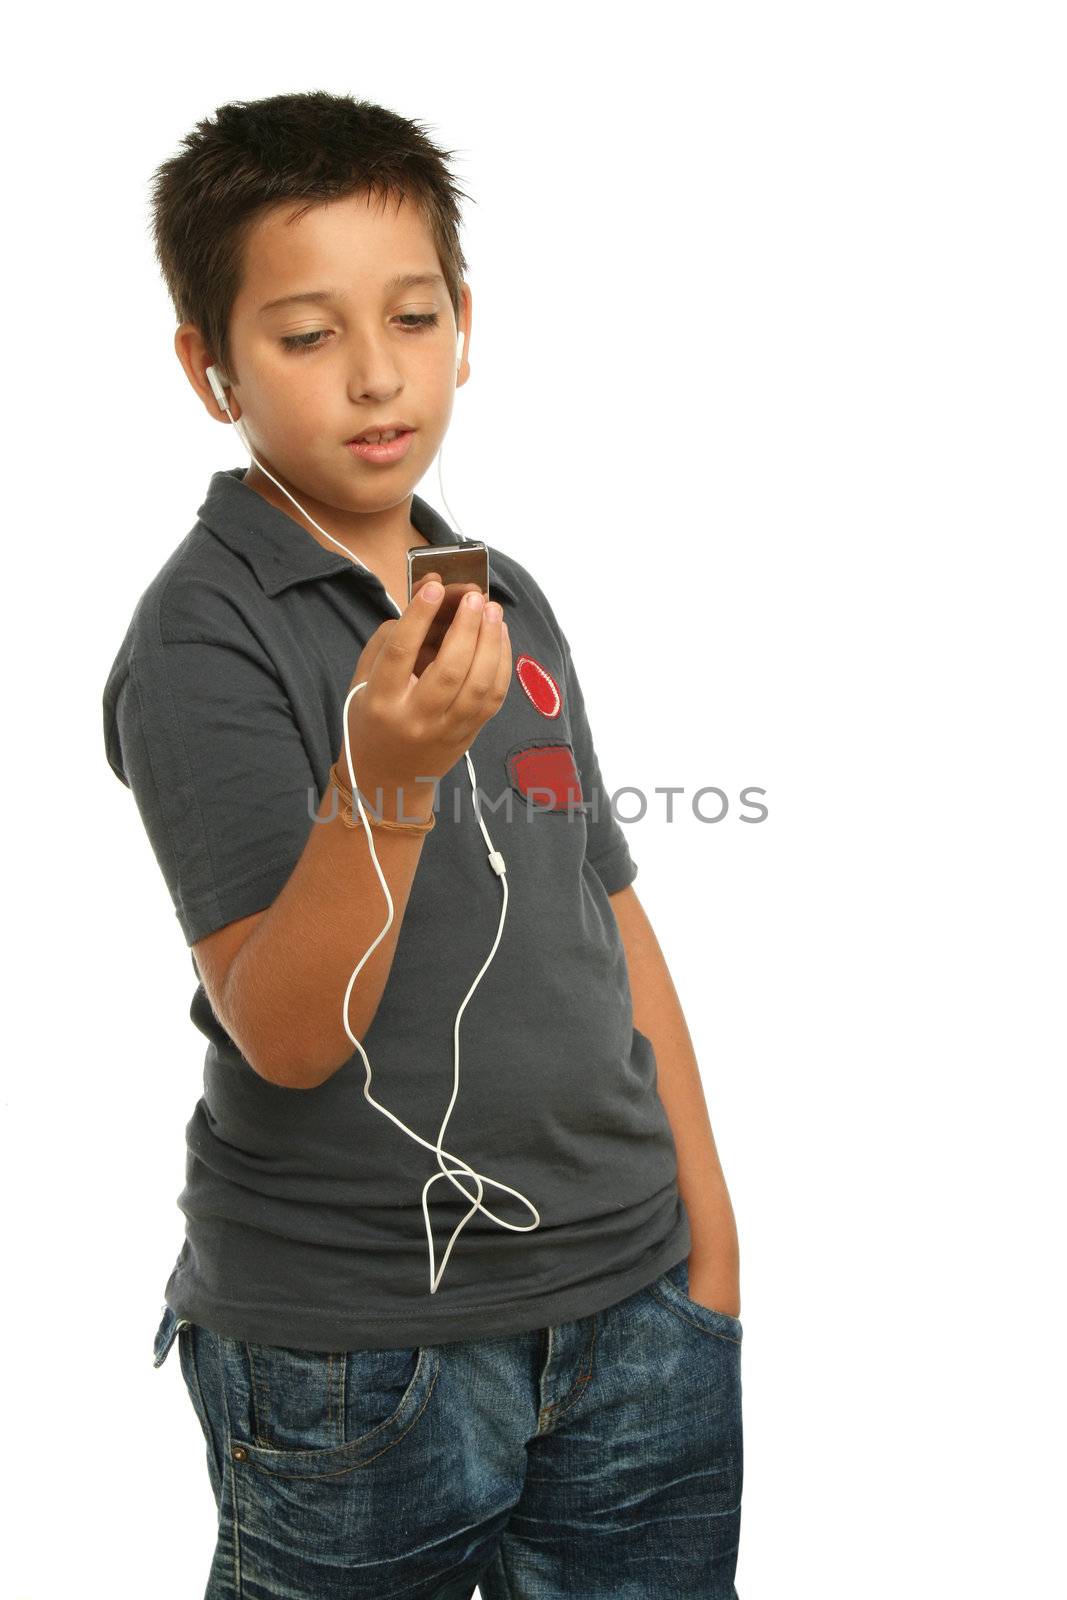 Cool boy listening music with a mp4 player by Erdosain